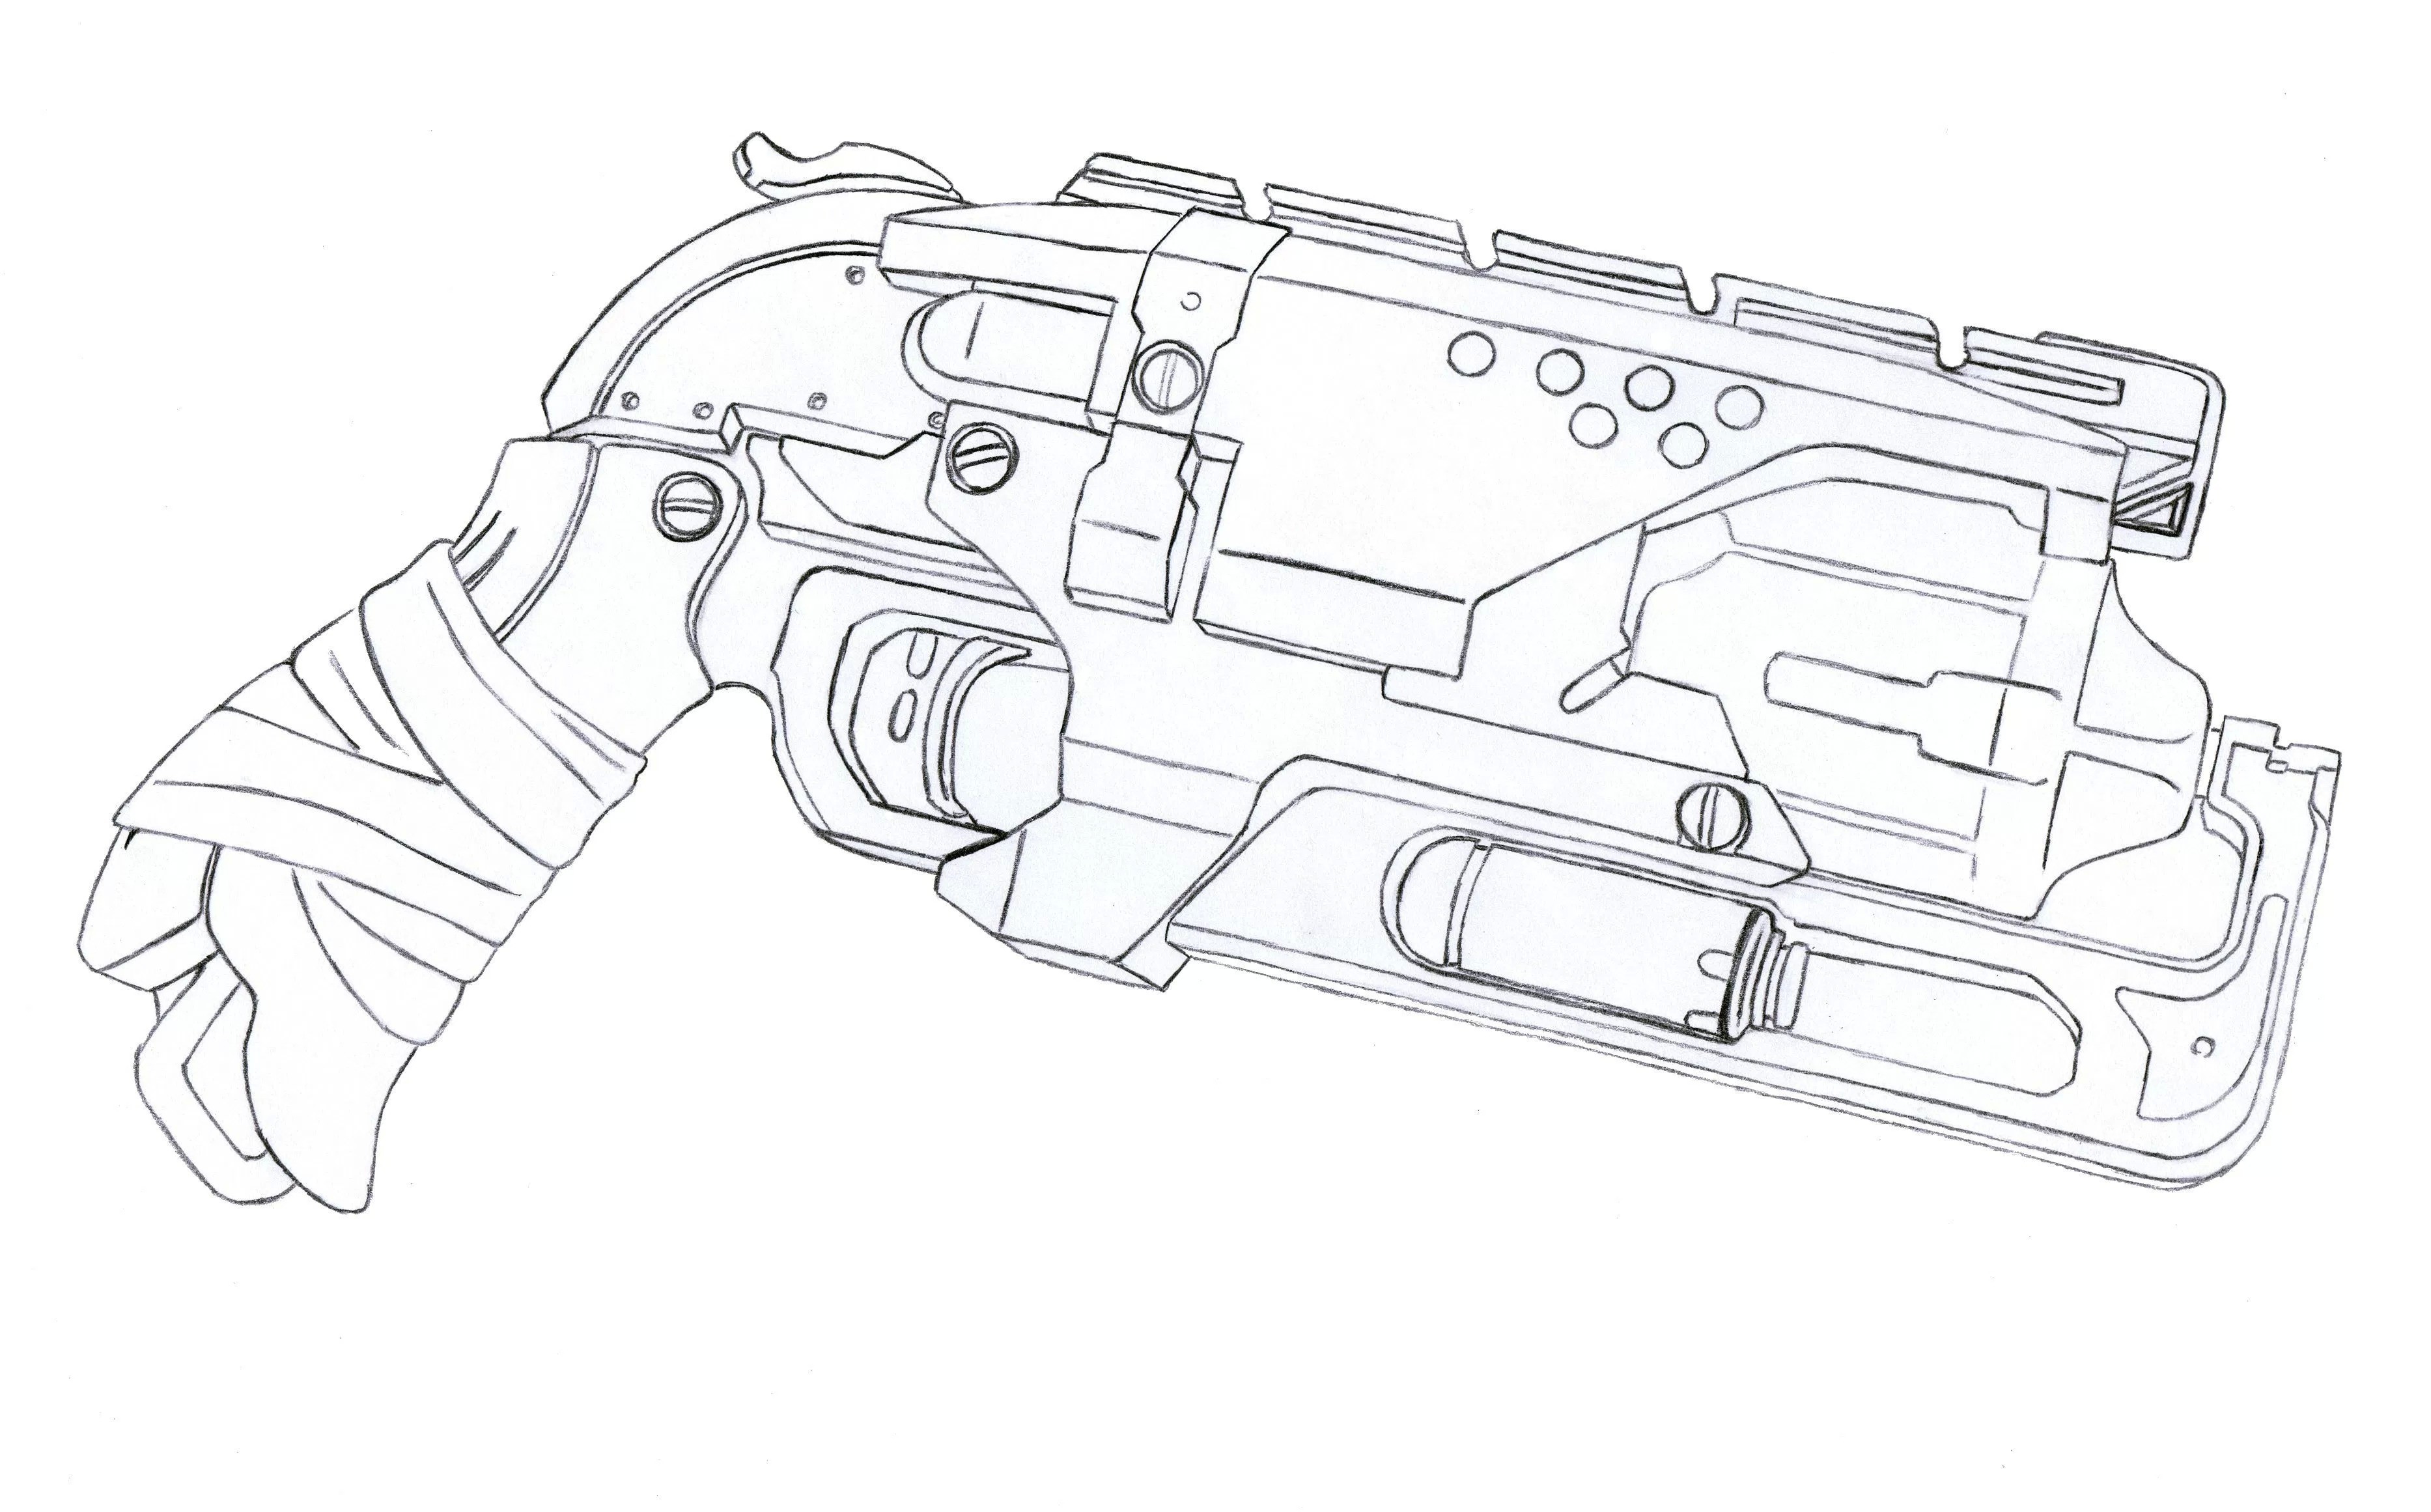 Nerf Gun Coloring Pages at GetColorings.com | Free ...